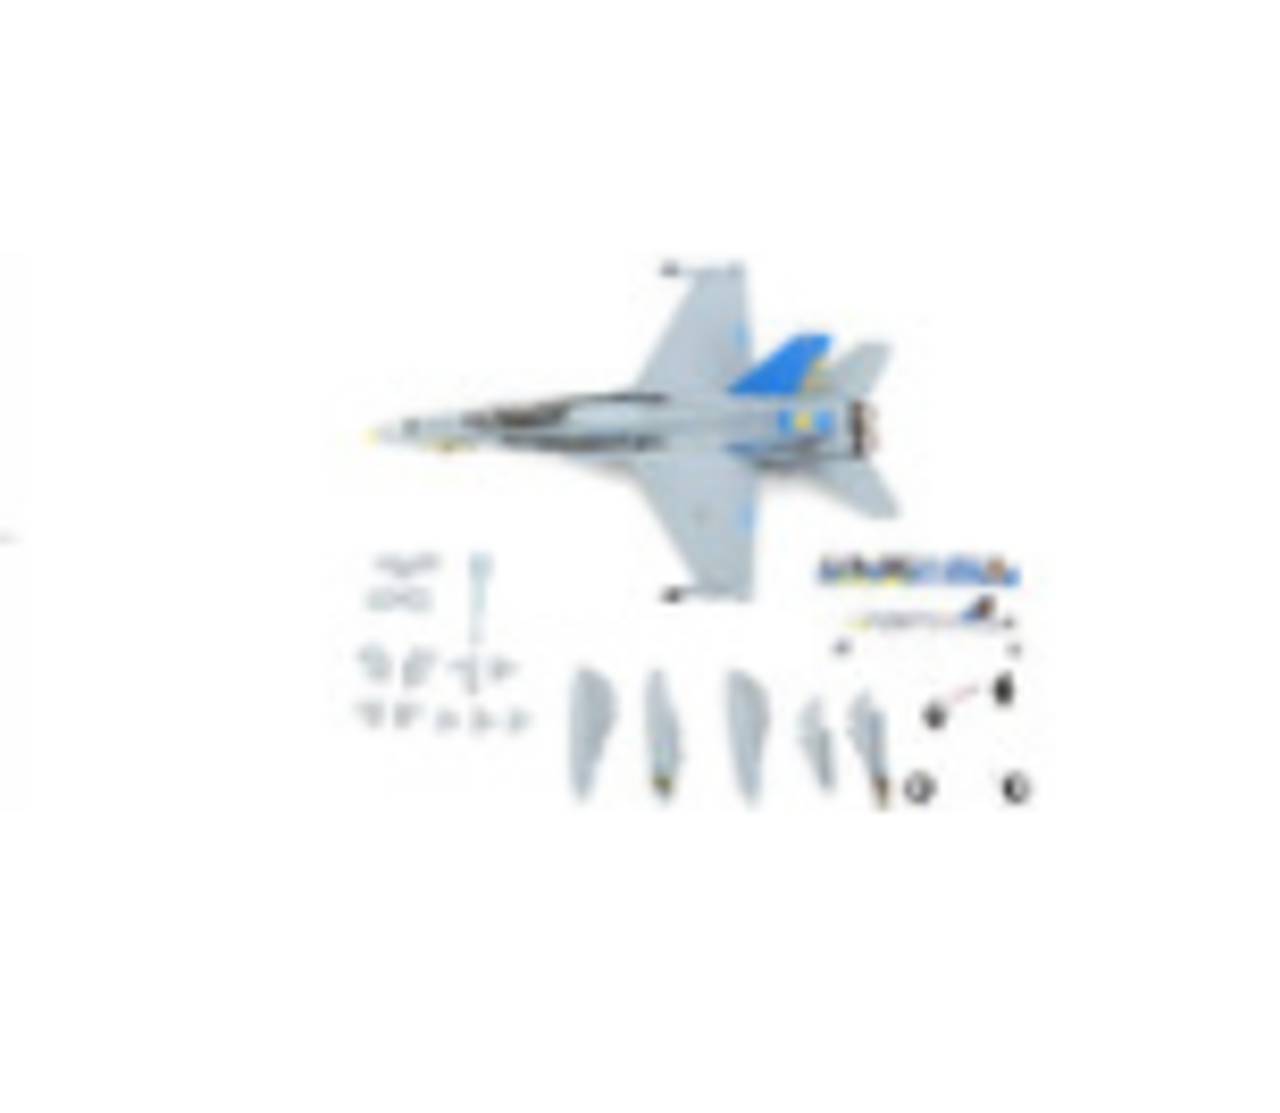 F/A-18C U.S. Navy Hornet Fighter Aircraft "VFA-82 Marauders" with Display Stand Limited Edition to 600 pieces Worldwide 1/72 Diecast Model by JC Wings